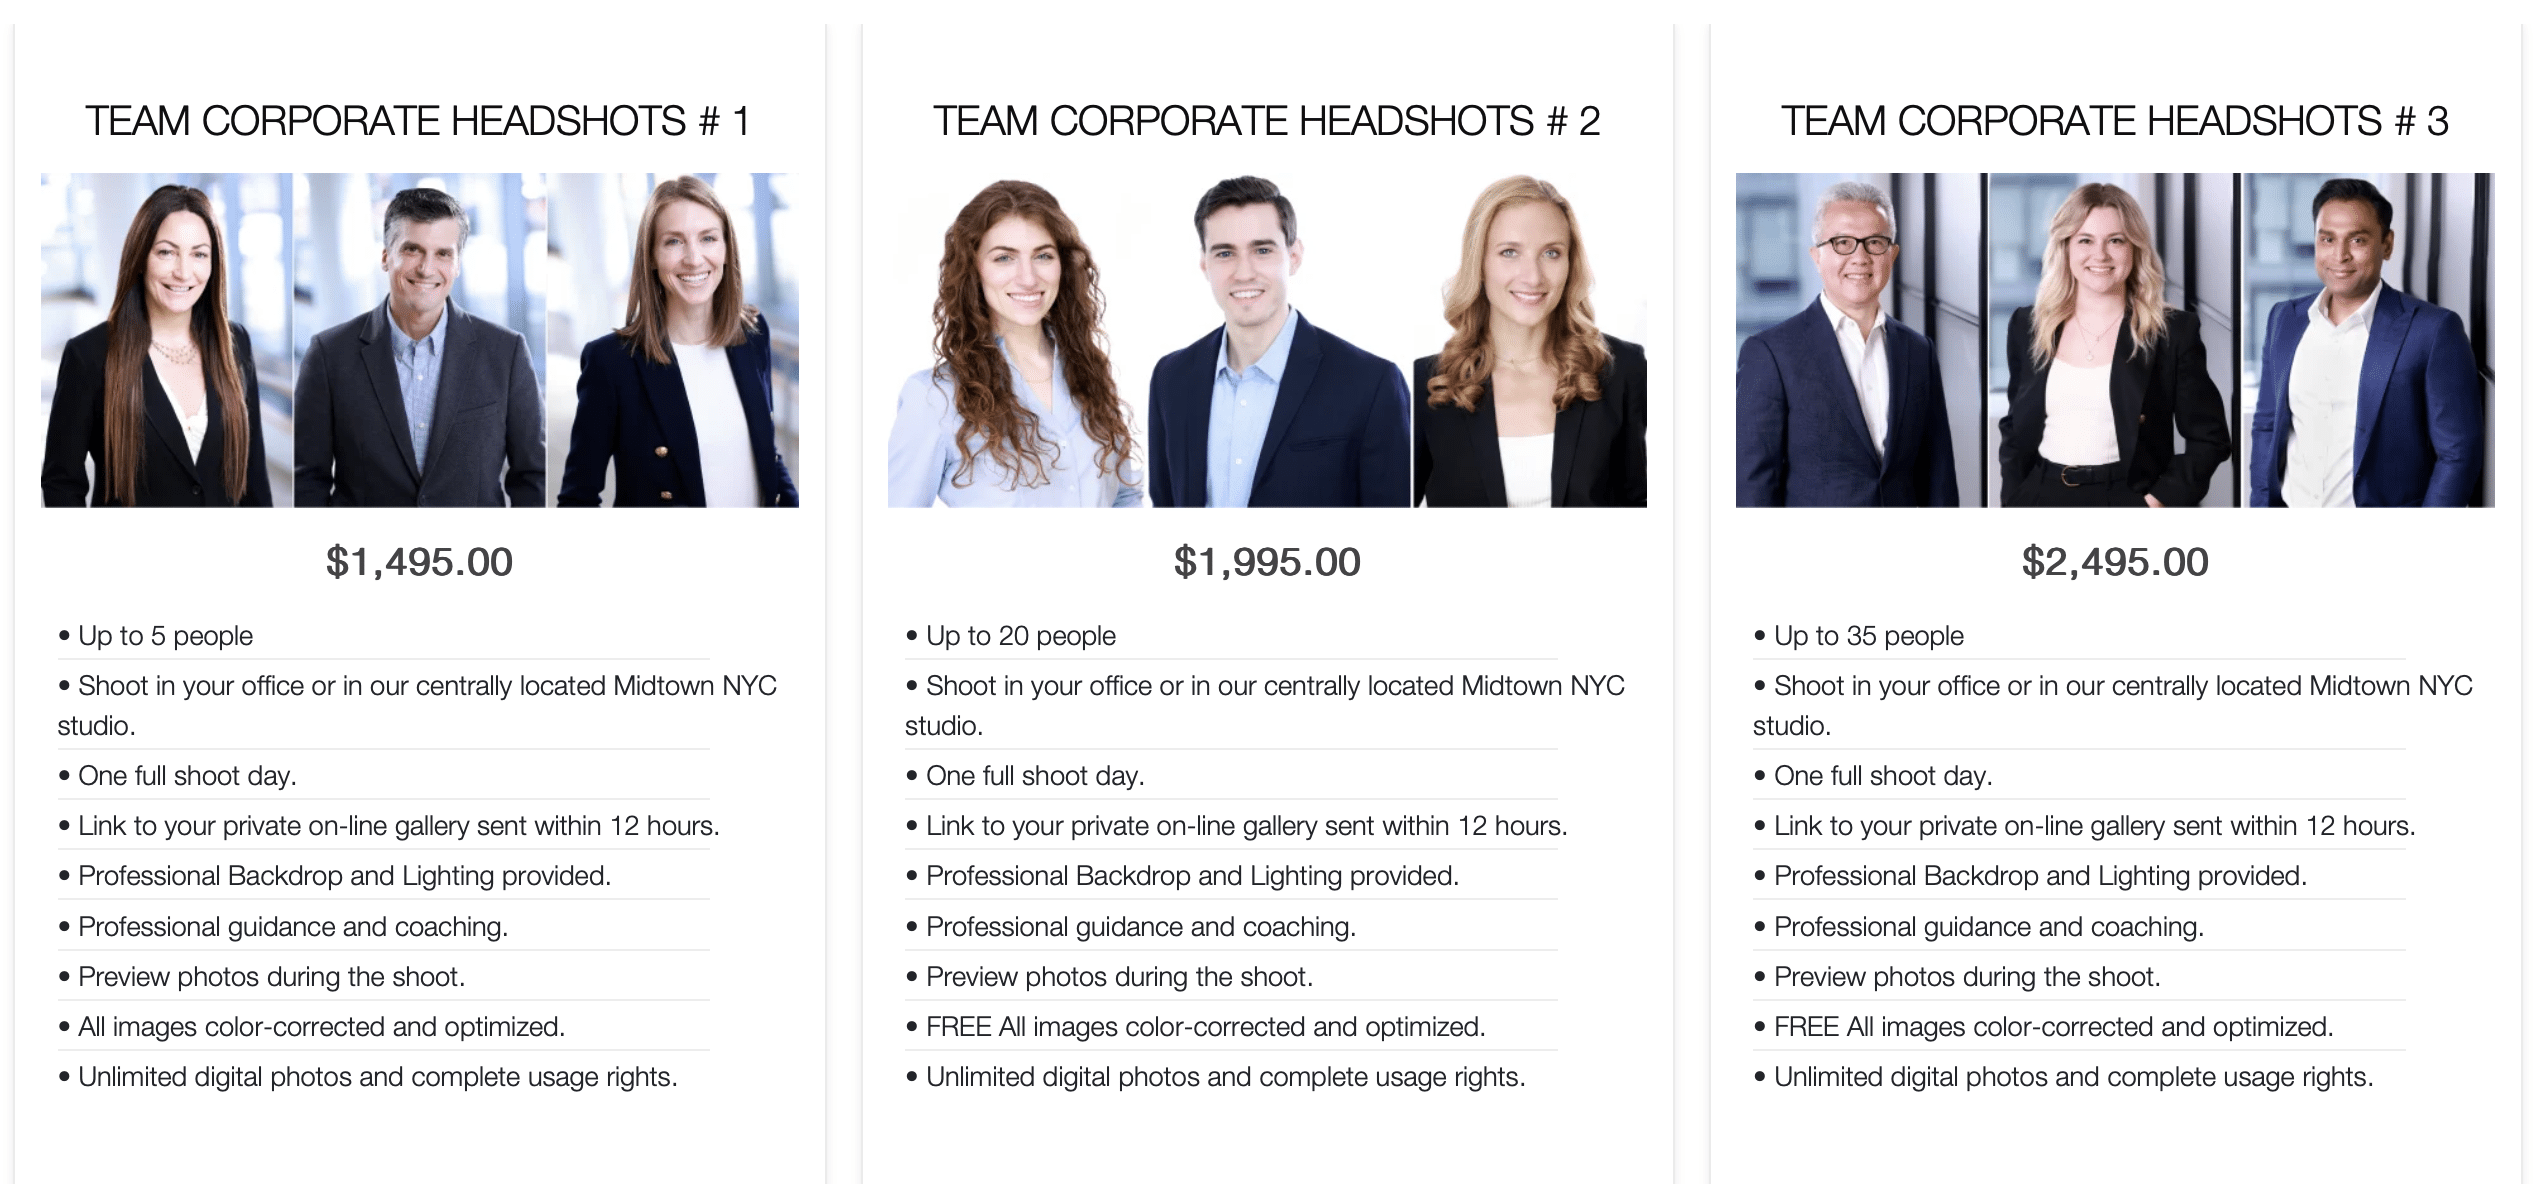 corporate team headshots prices in nyc